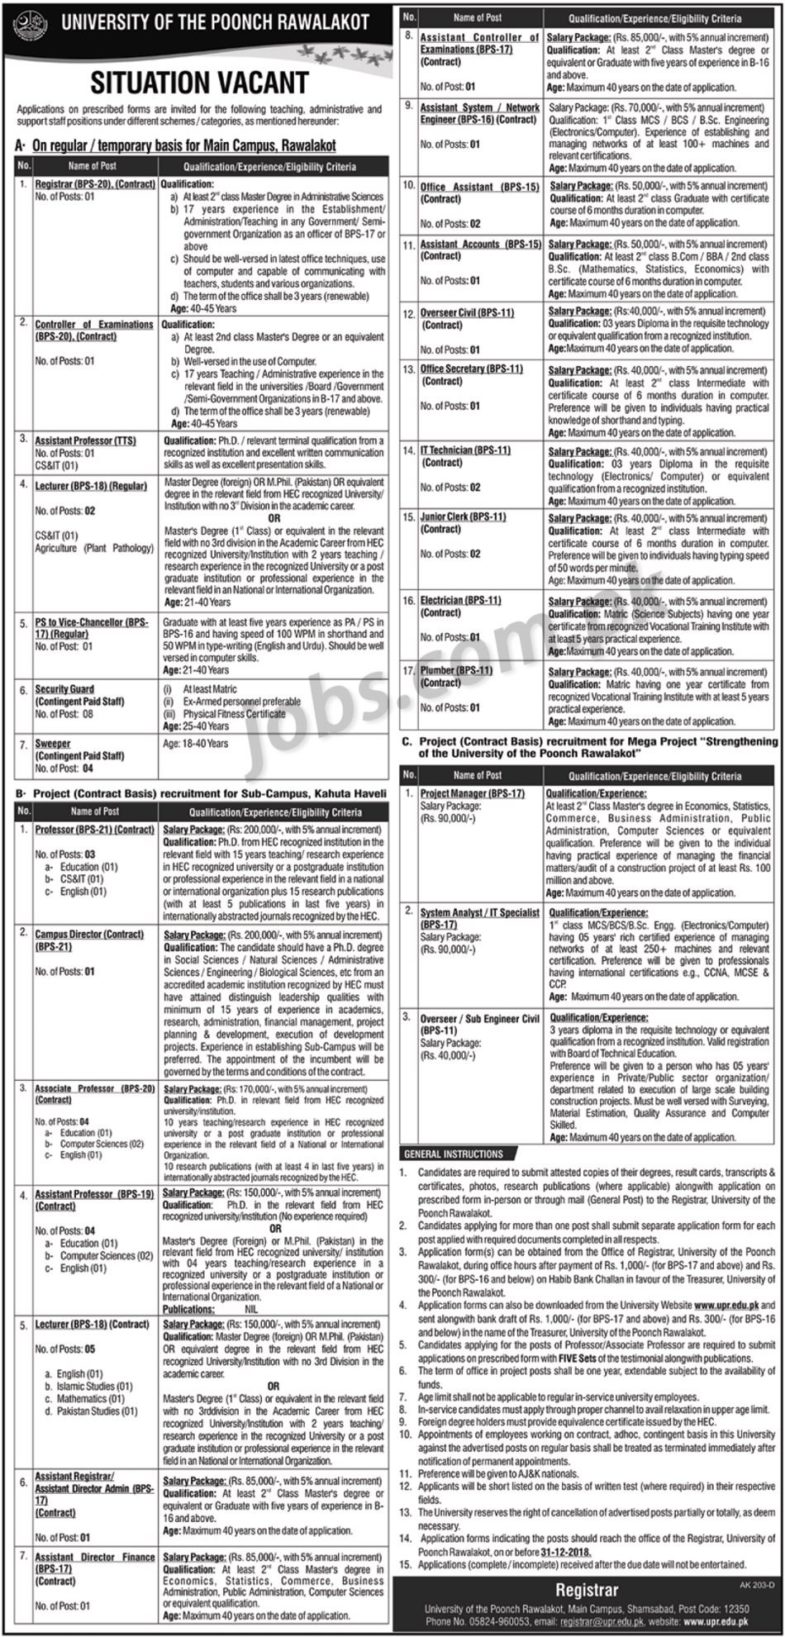 University of Poonch Rawalakot Jobs 2019 for 53+ Posts (Multiple Categories)